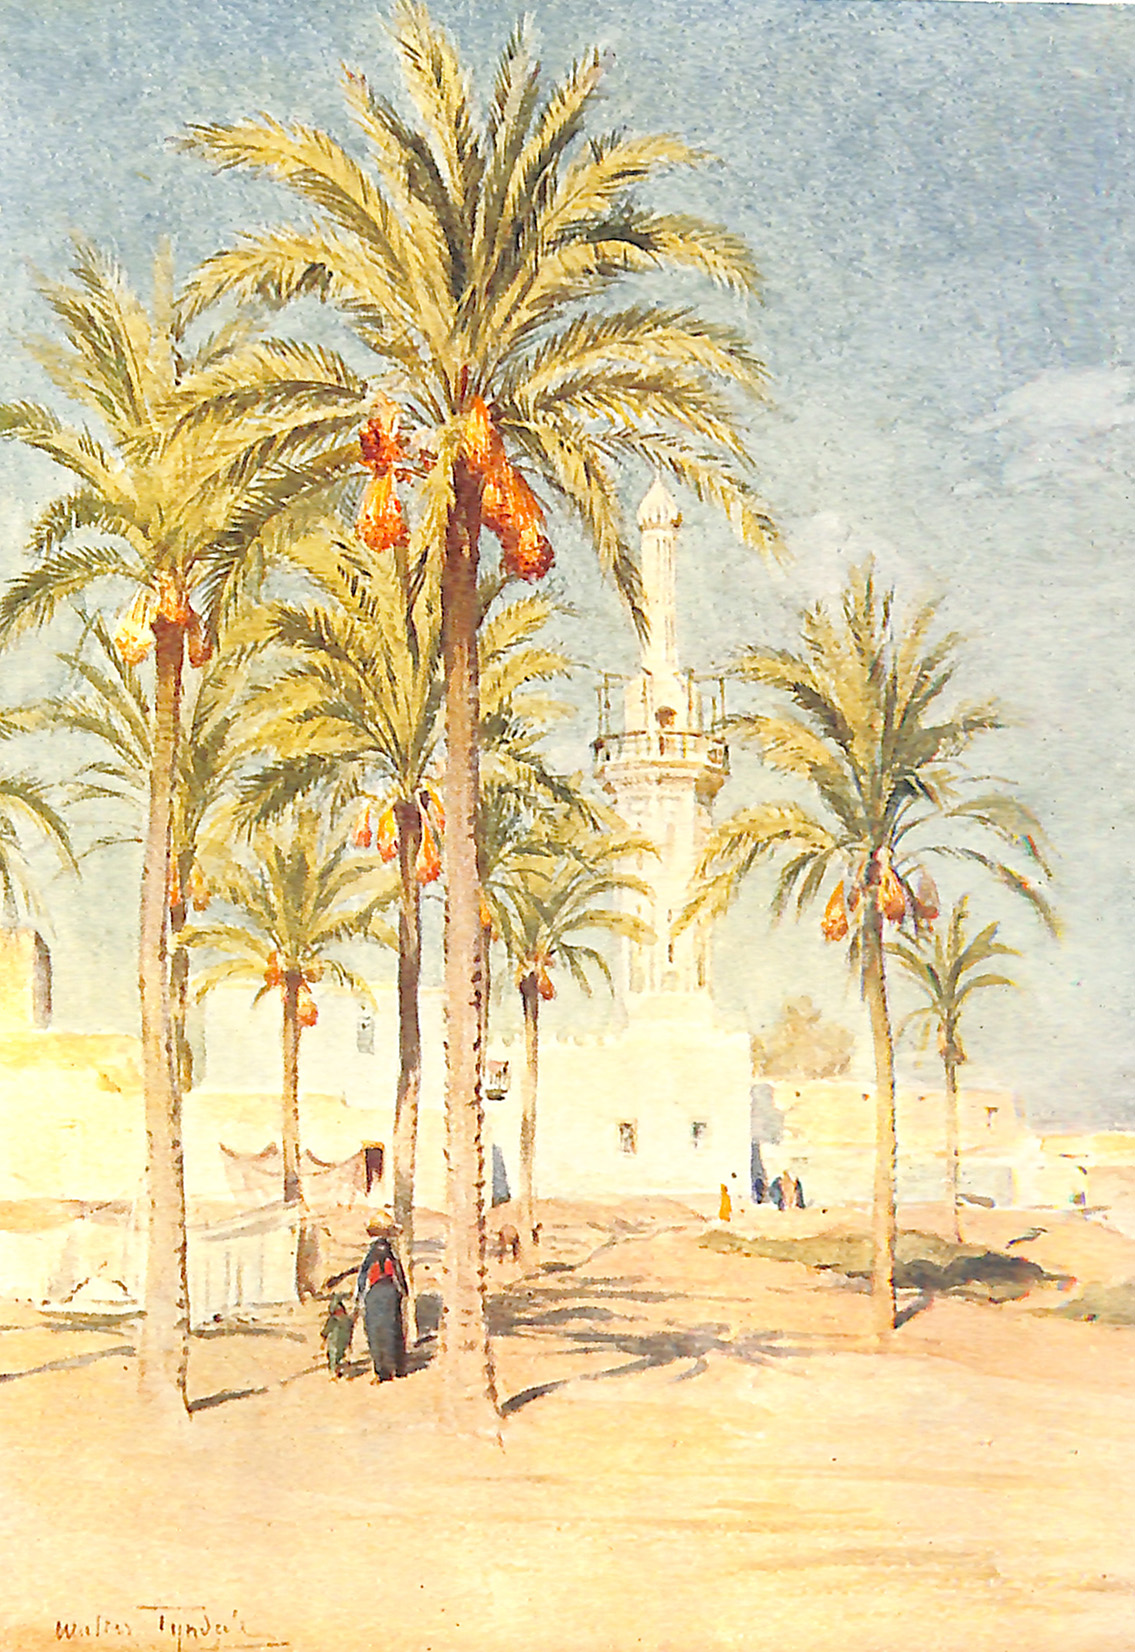 The Mosque At Aboukir